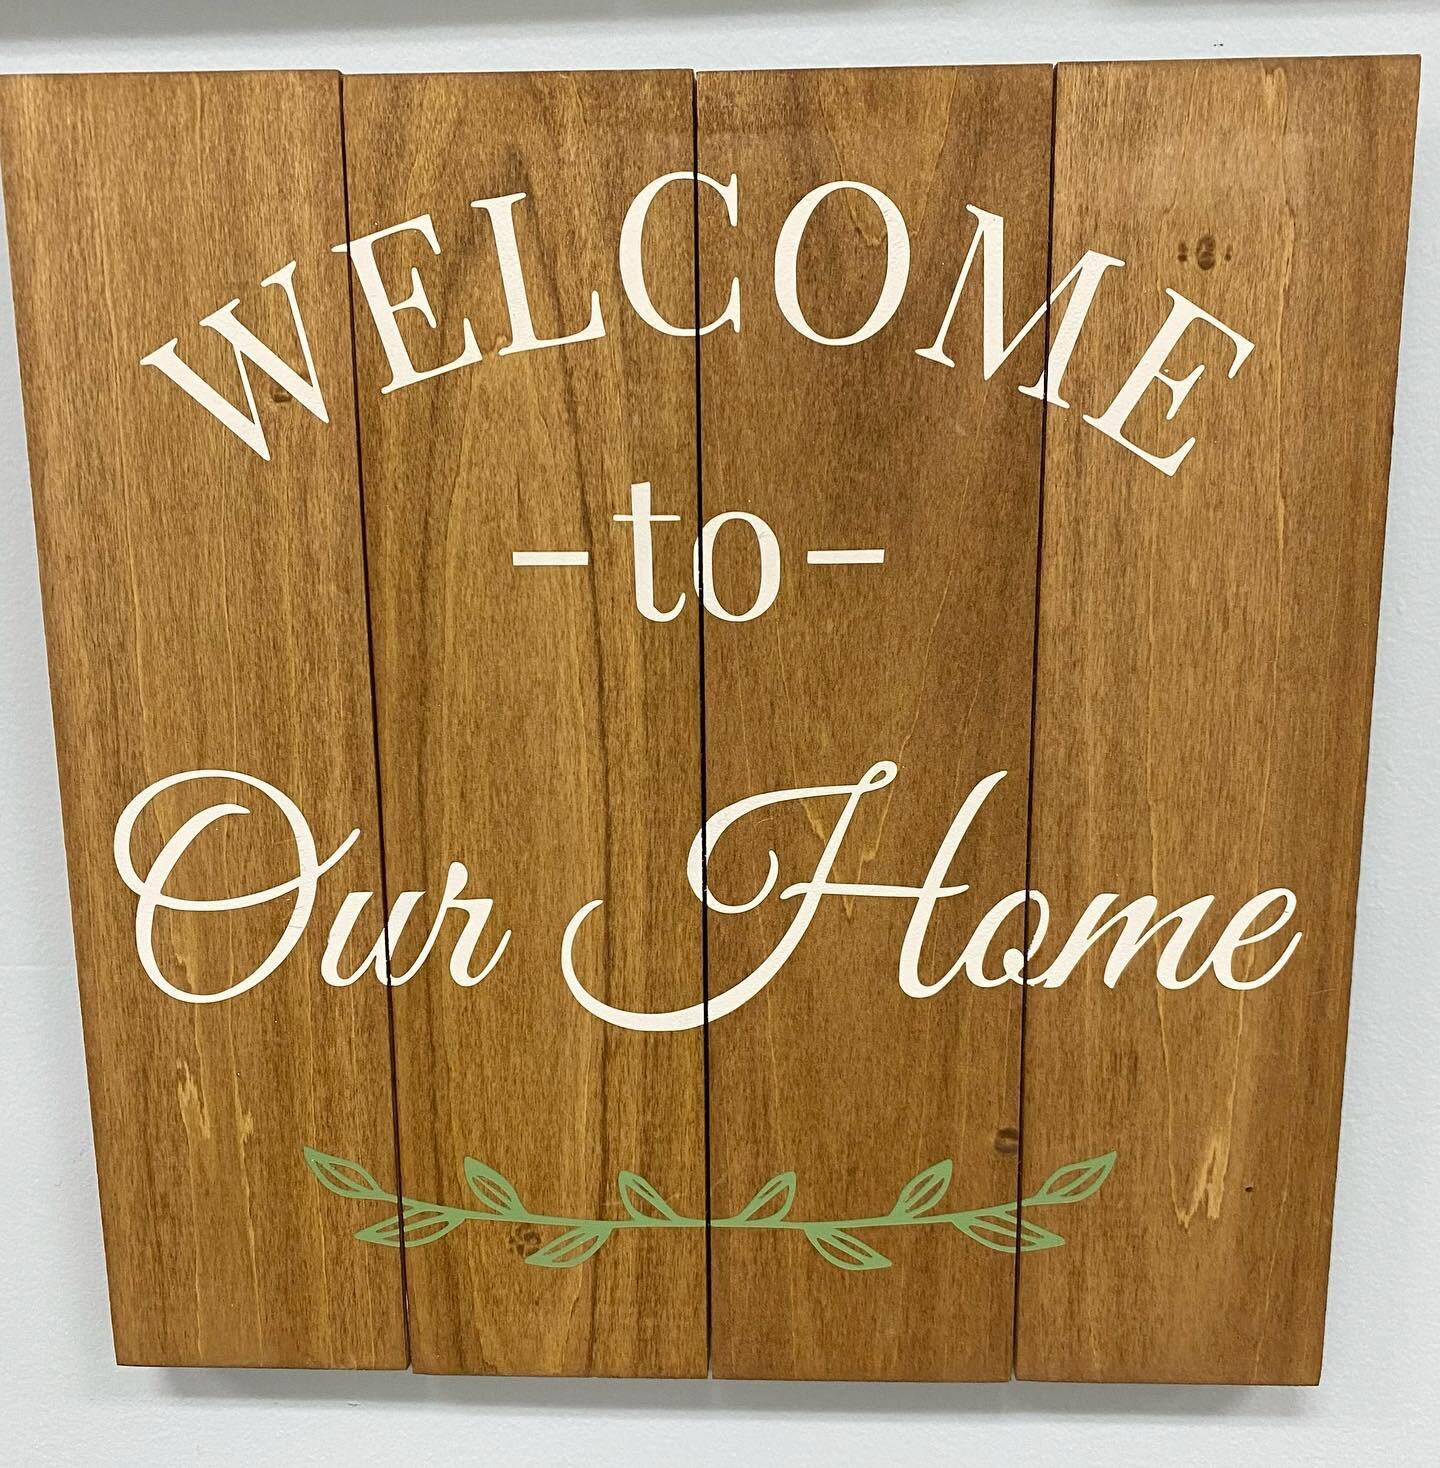 We love this classic welcome to our home square sign! This design is available in our stencil bar, which means you can make it at any workshop if you forgot to order your project in advance. Workshop dates are available at wordsonwood.com 

-
-
#word